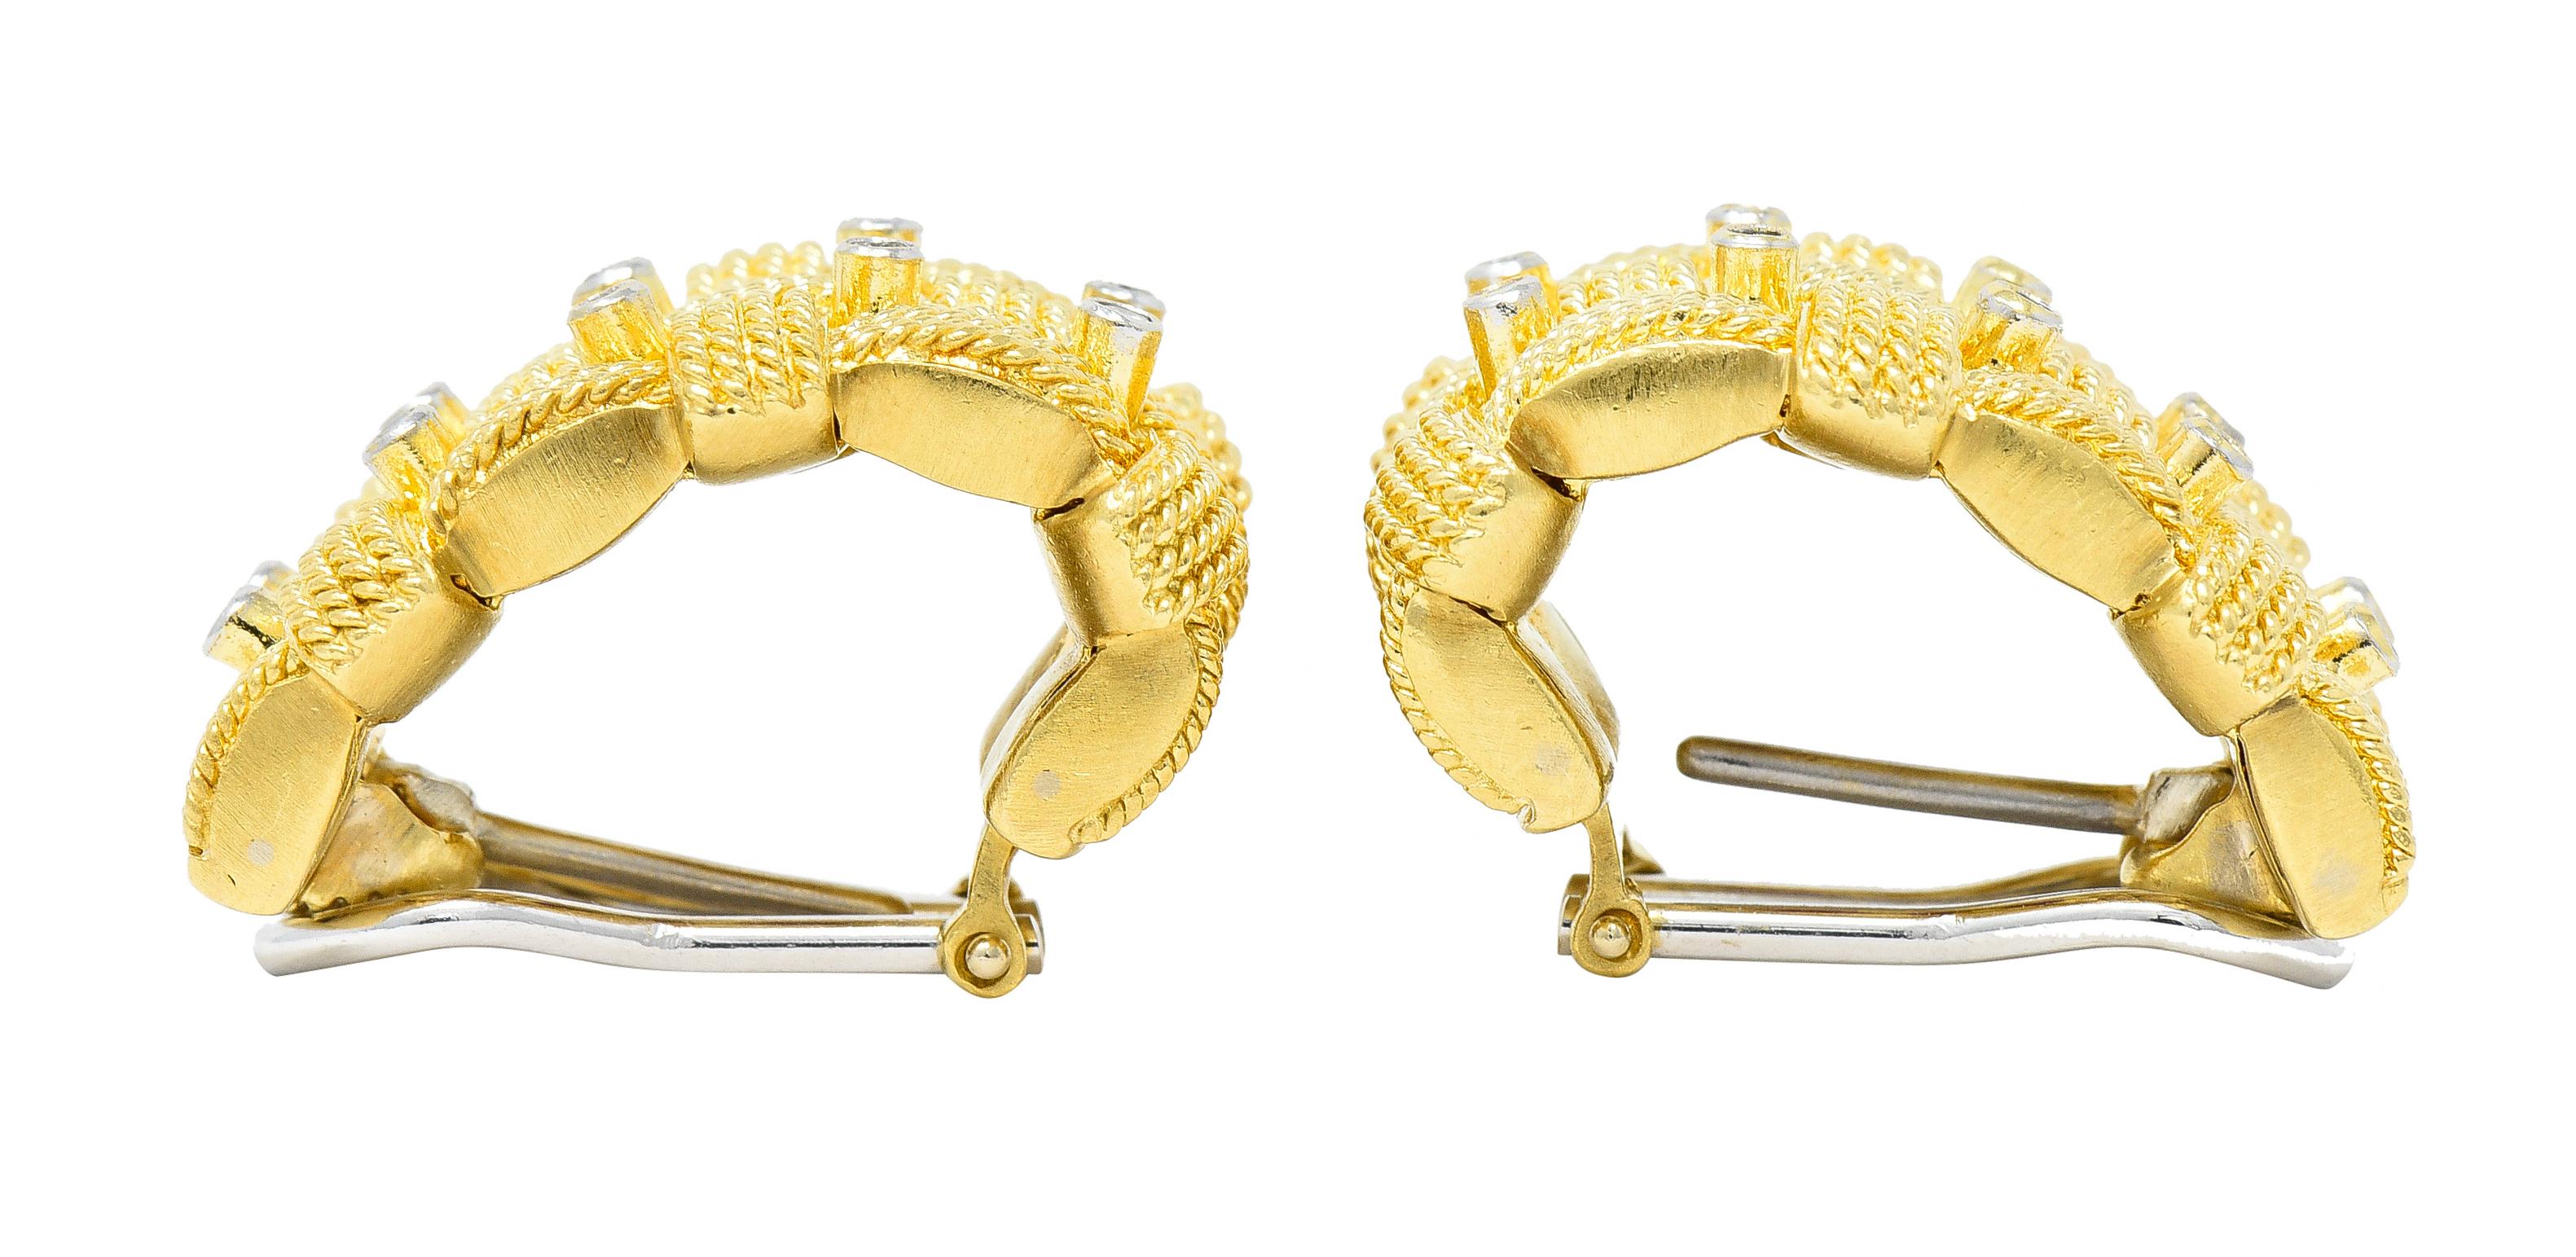 Roberto Coin 1990s Diamond 18 Karat Yellow Gold Appassionata Half-Hoop Earrings In Excellent Condition For Sale In Philadelphia, PA